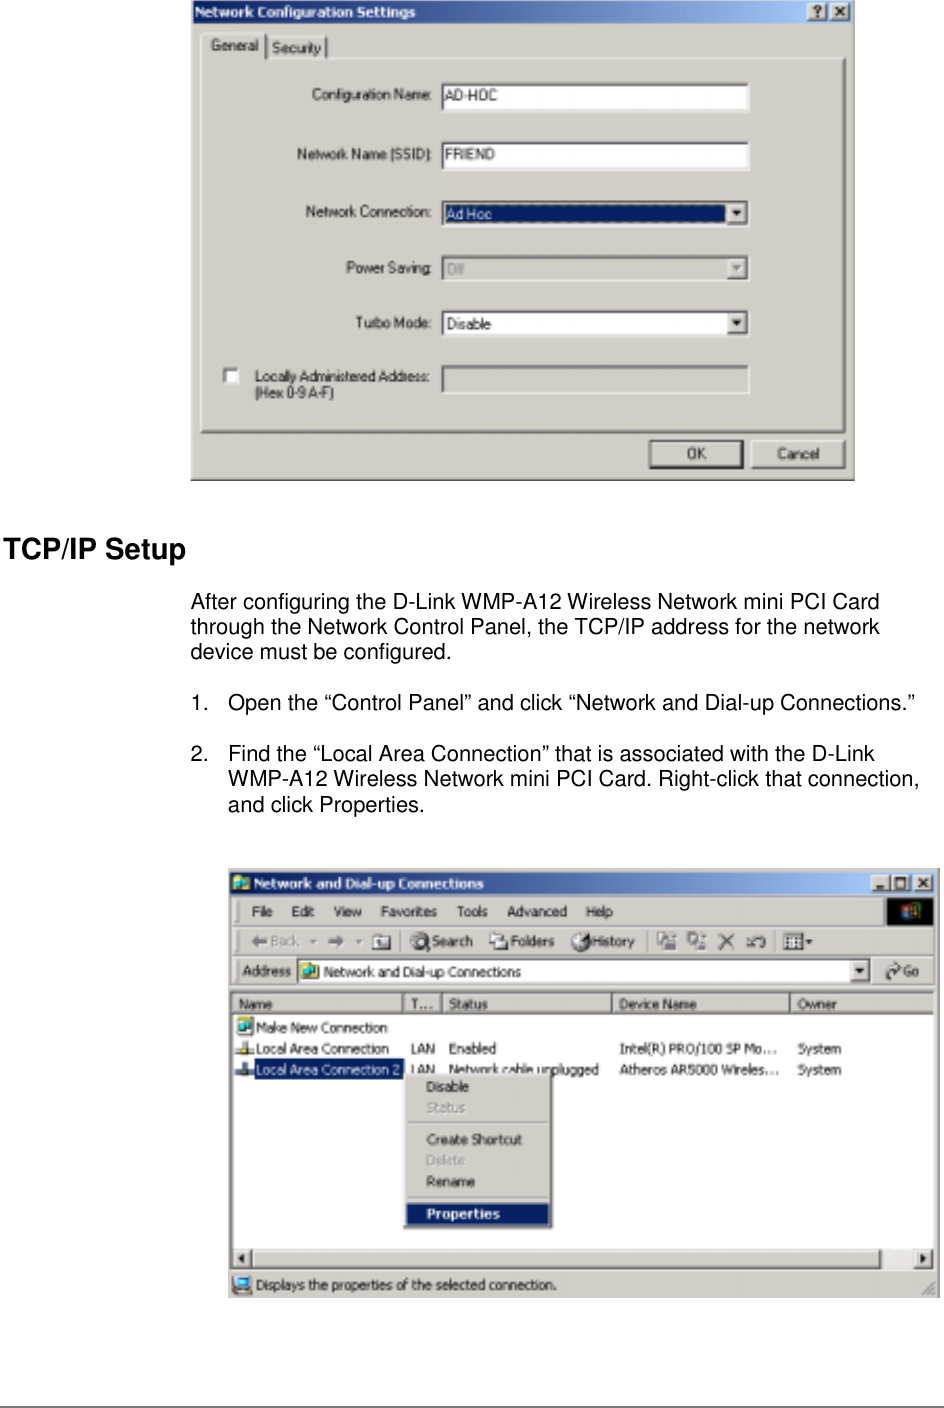 TCP/IP SetupAfter configuring the D-Link WMP-A12 Wireless Network mini PCI Cardthrough the Network Control Panel, the TCP/IP address for the networkdevice must be configured.1.  Open the “Control Panel” and click “Network and Dial-up Connections.”2.  Find the “Local Area Connection” that is associated with the D-LinkWMP-A12 Wireless Network mini PCI Card. Right-click that connection,and click Properties.